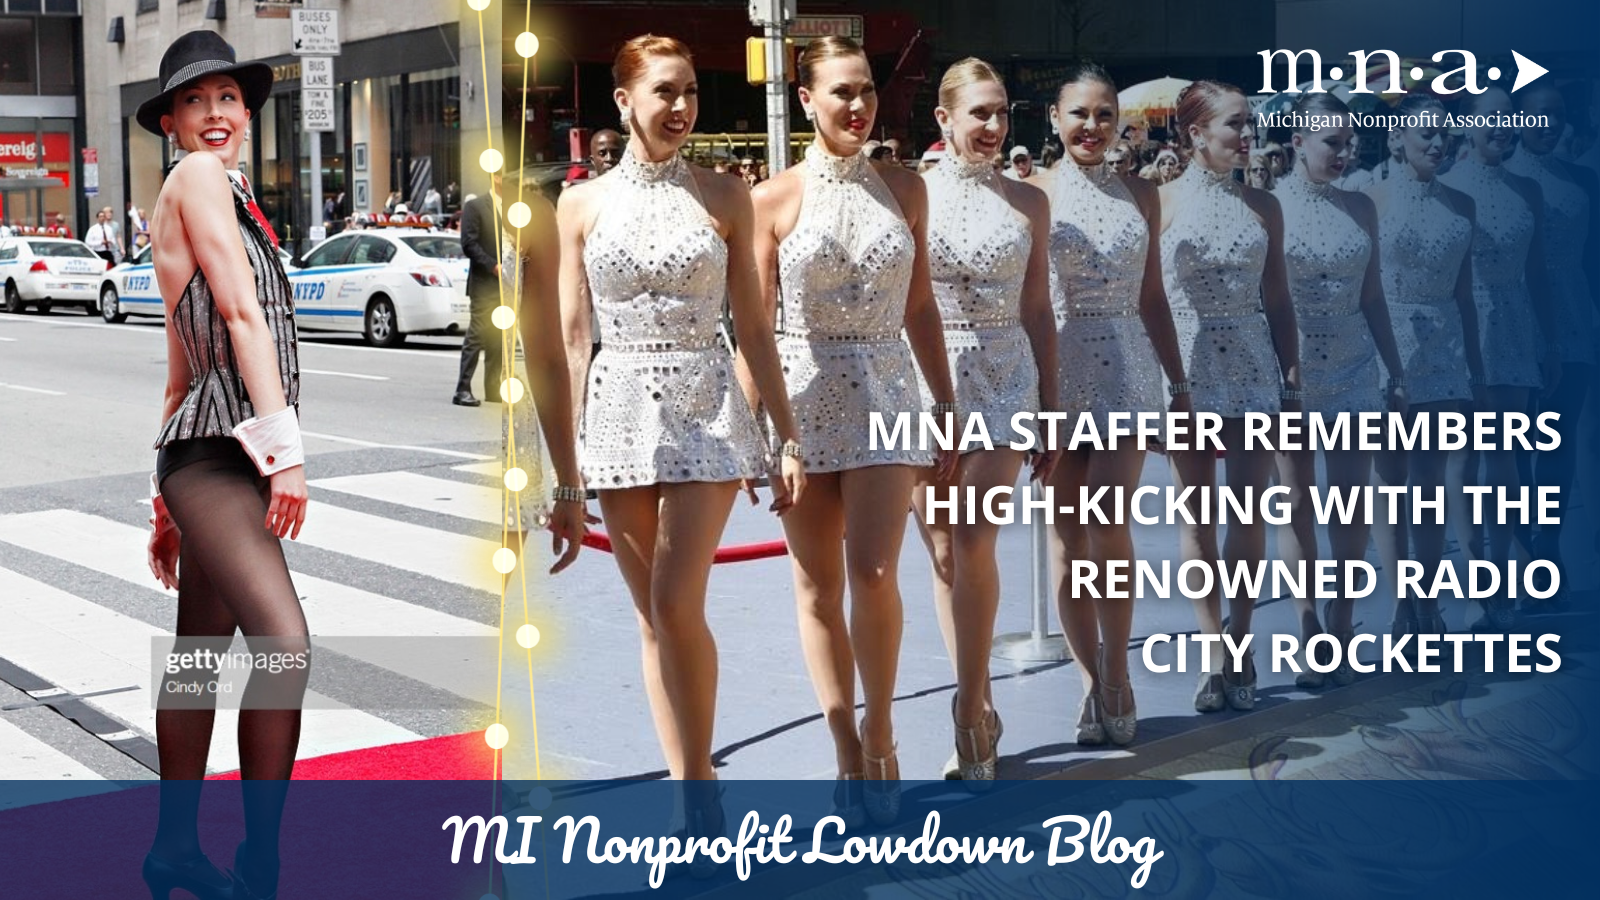 MNA staffer remembers high-kicking with the renowned Radio City Rockettes